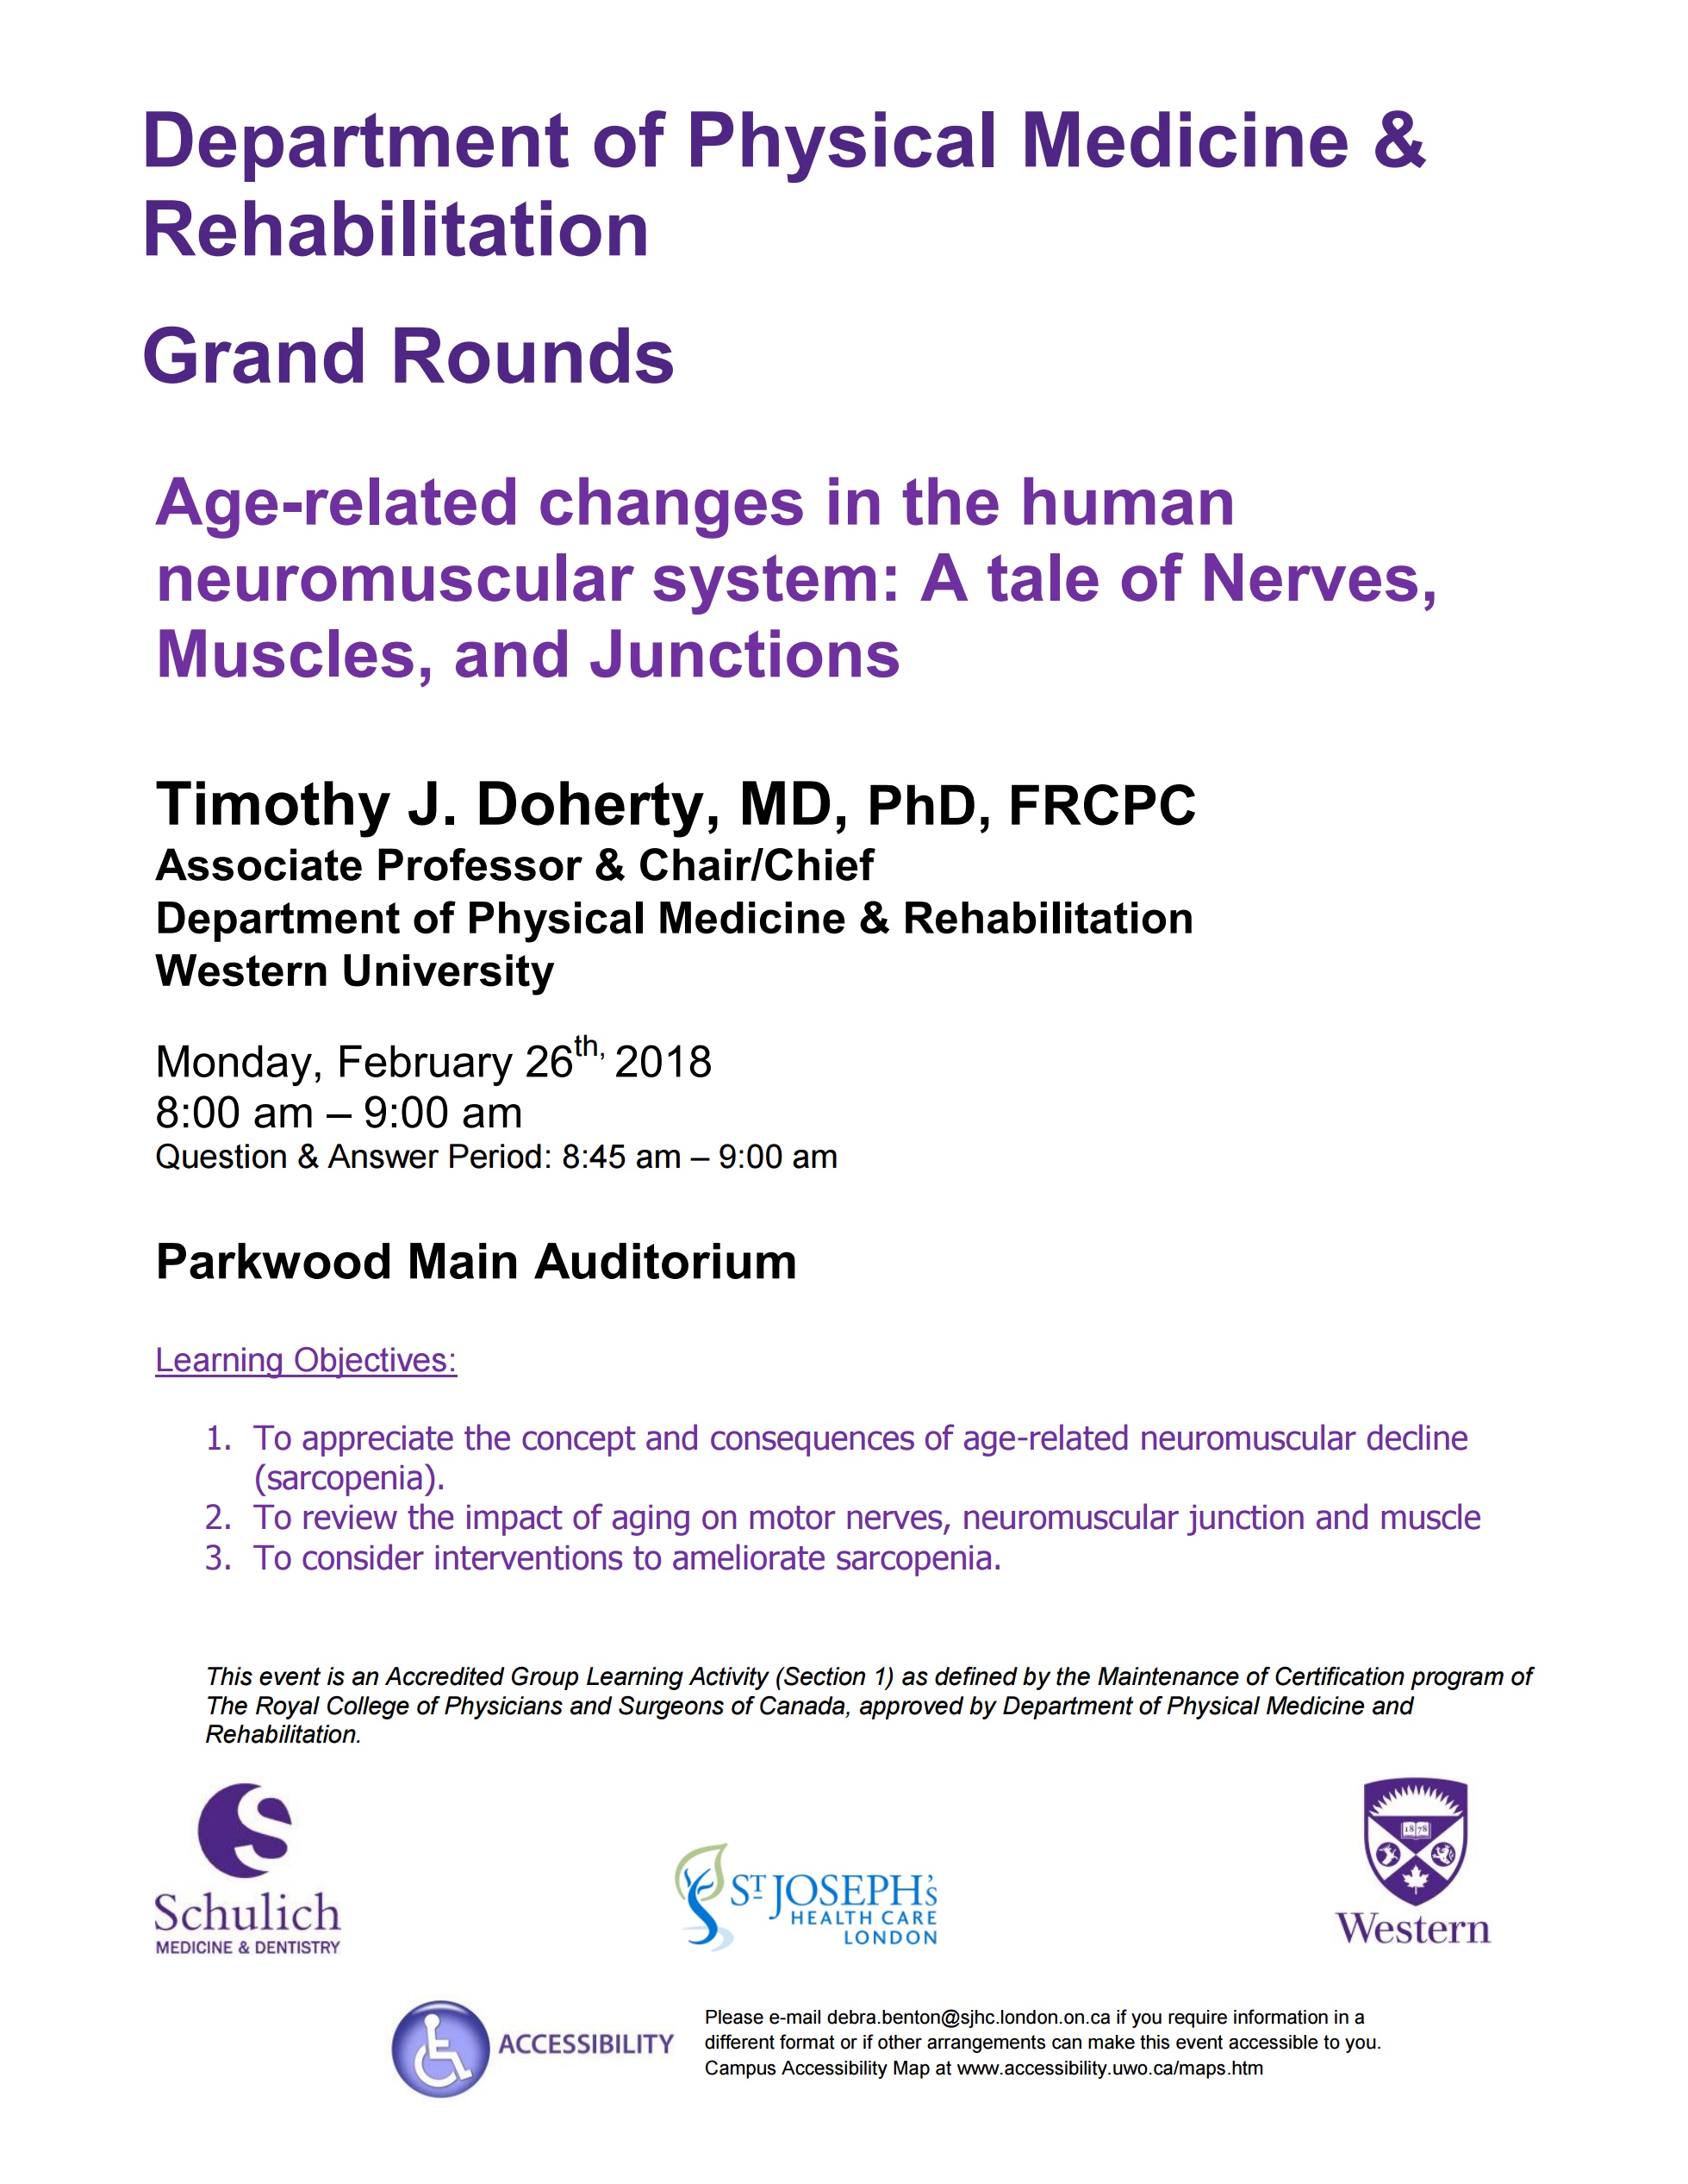 Grand rounds poster